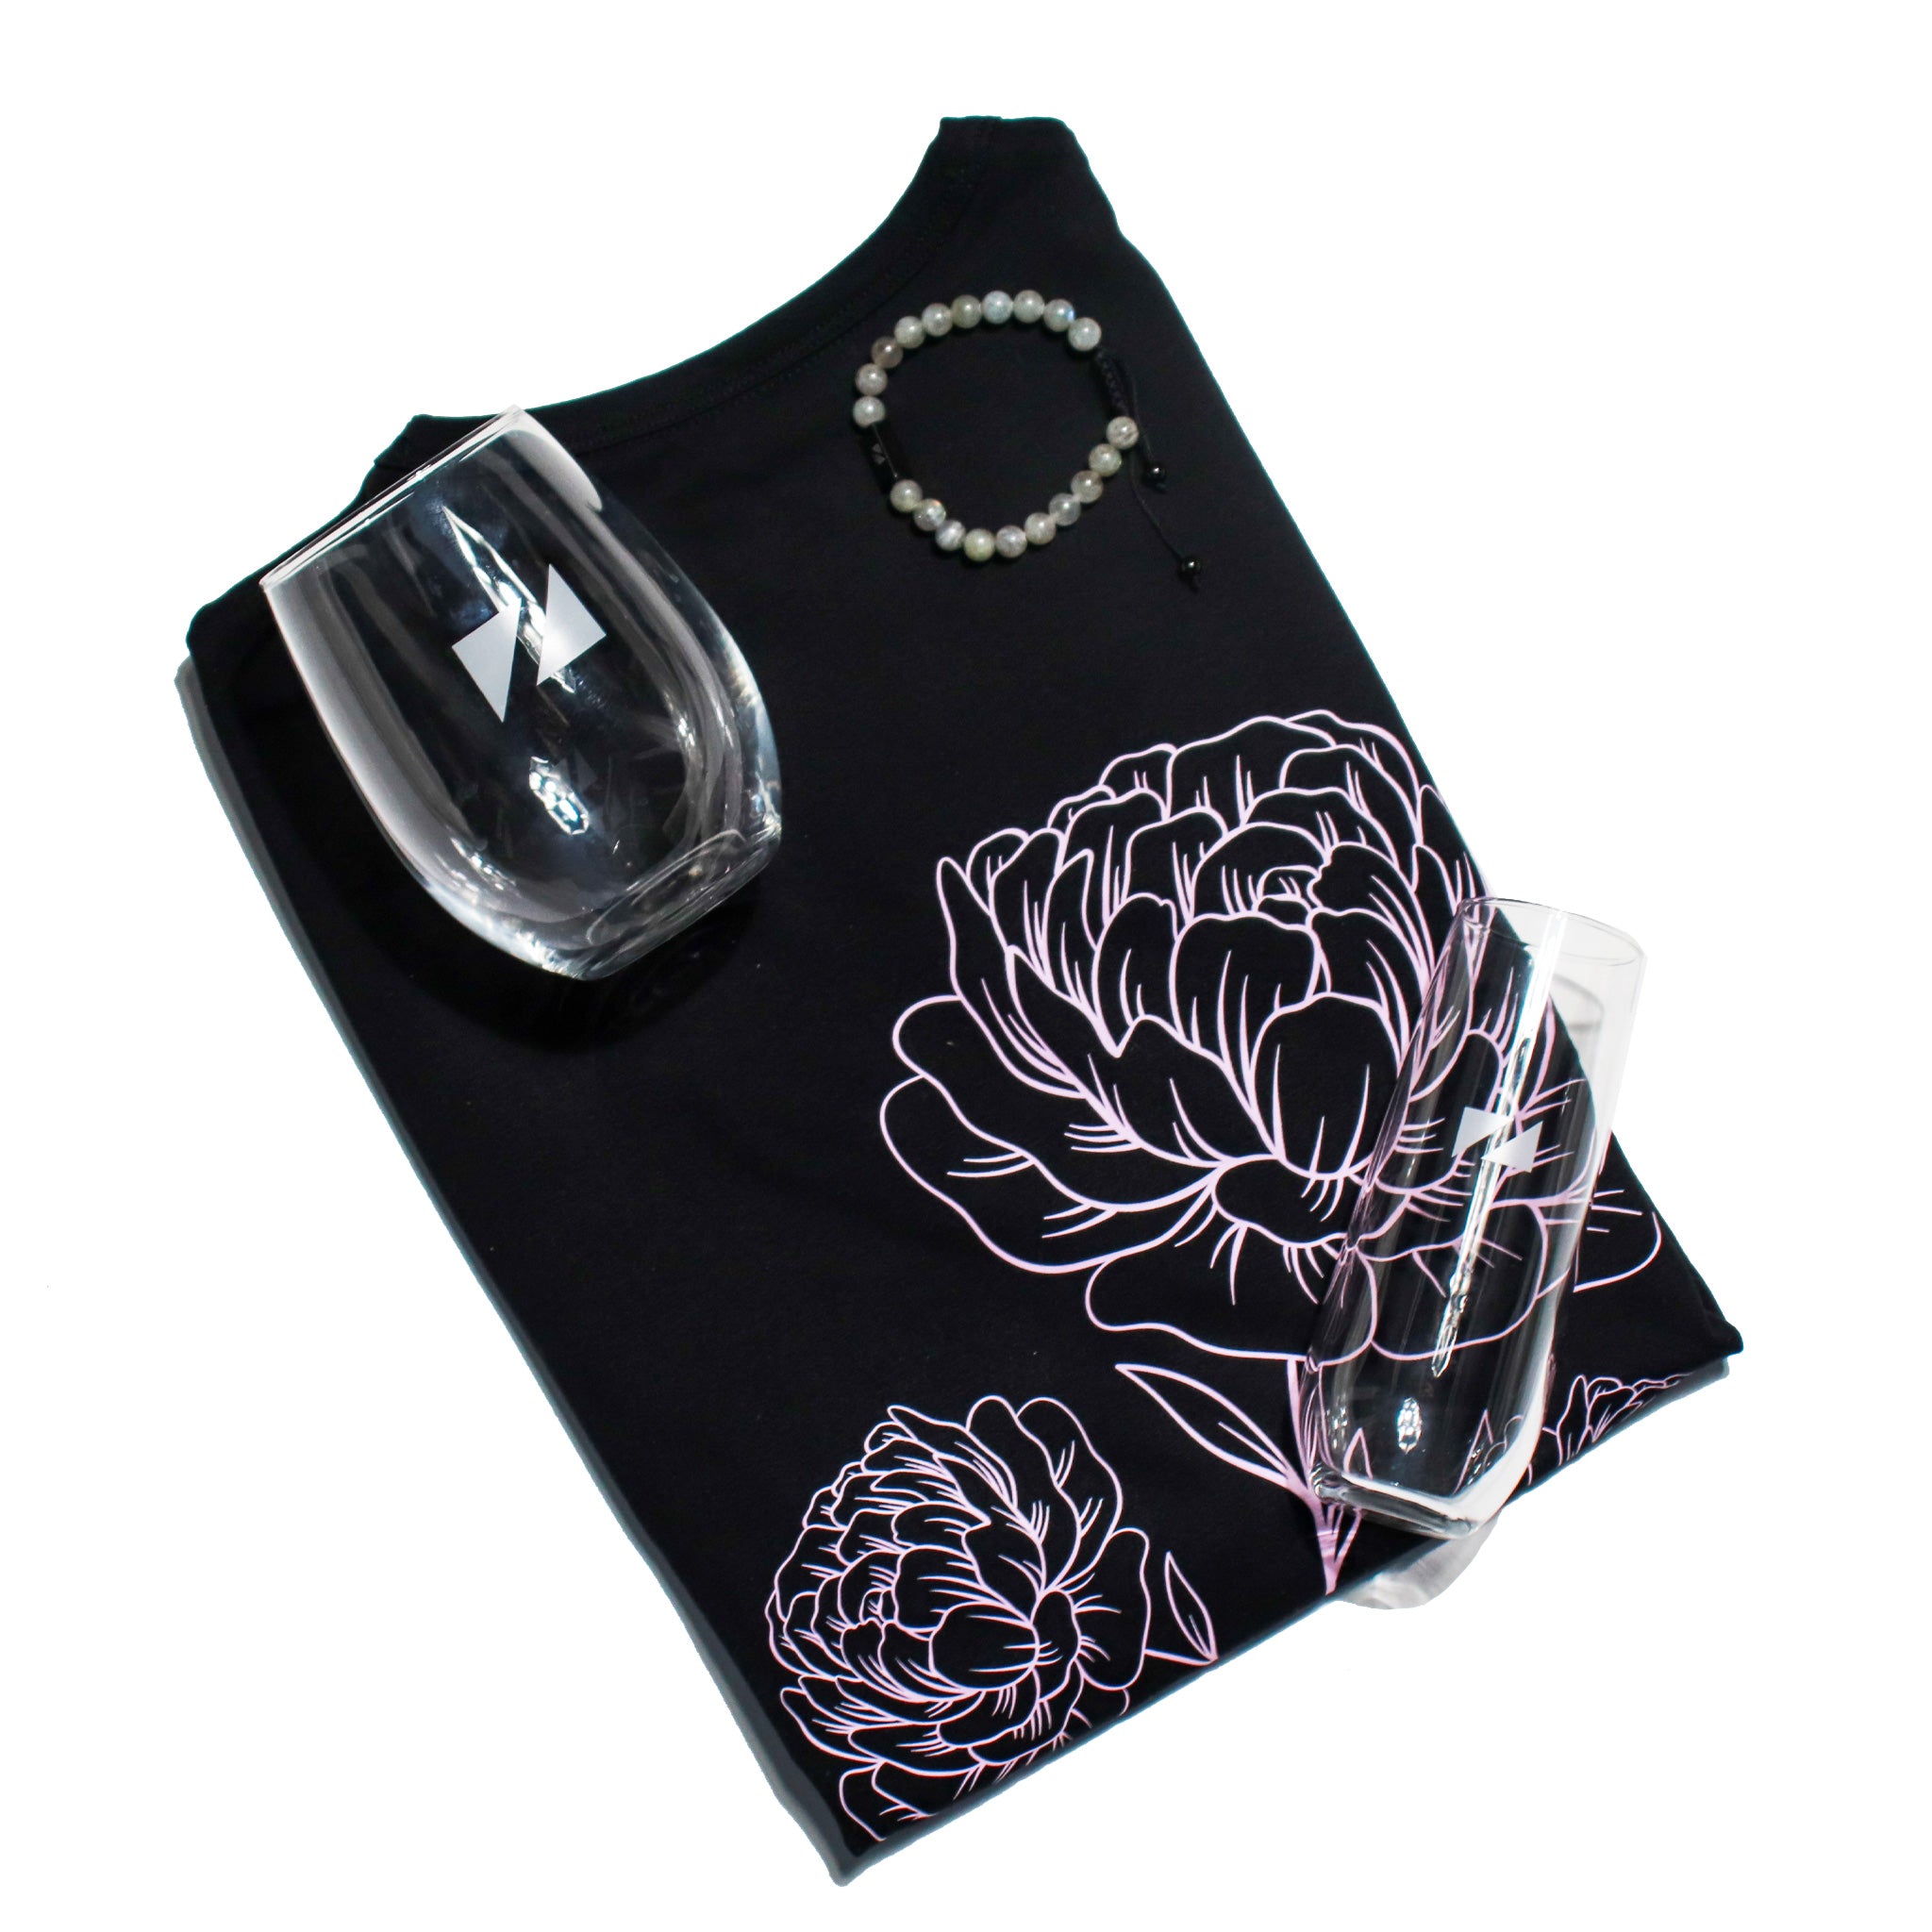 Bundle 3: The Luxe Carnation Tee + Elements Bracelet + Unwine Stemless Glass and Flute Bundle